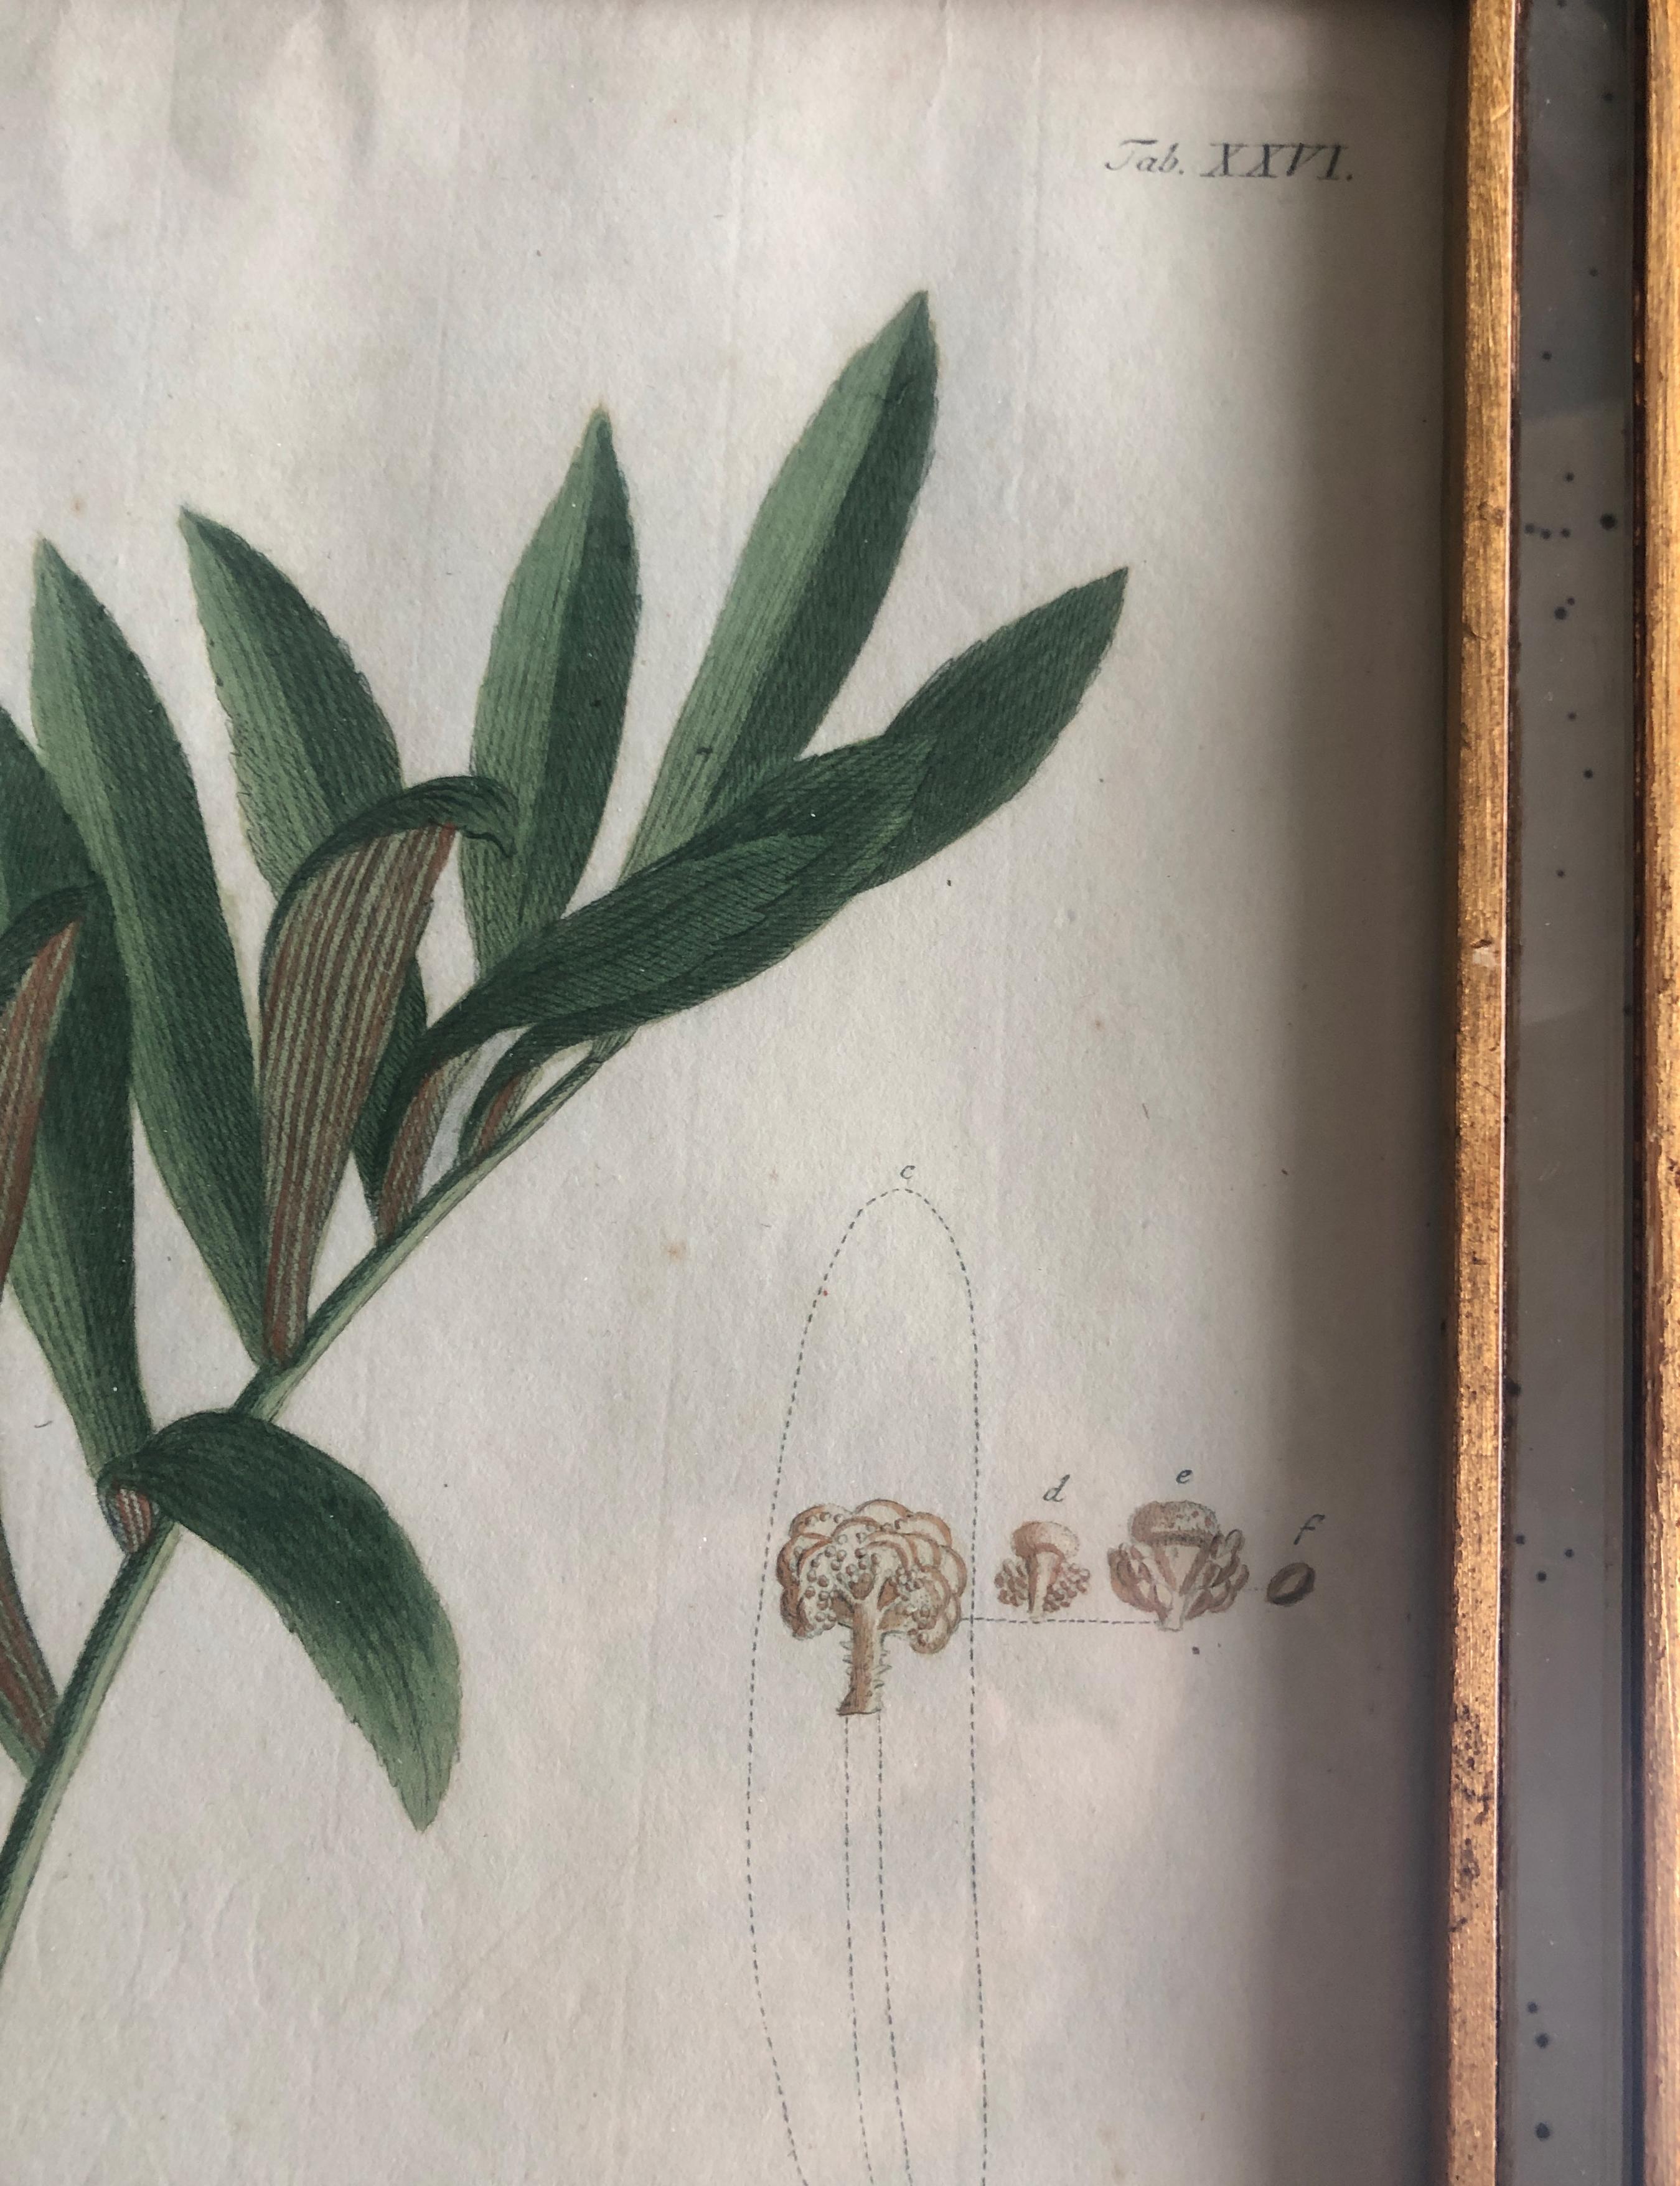 Two 18th Century Hand Colored Botanical Engraving of Plants from (1771) For Sale 4